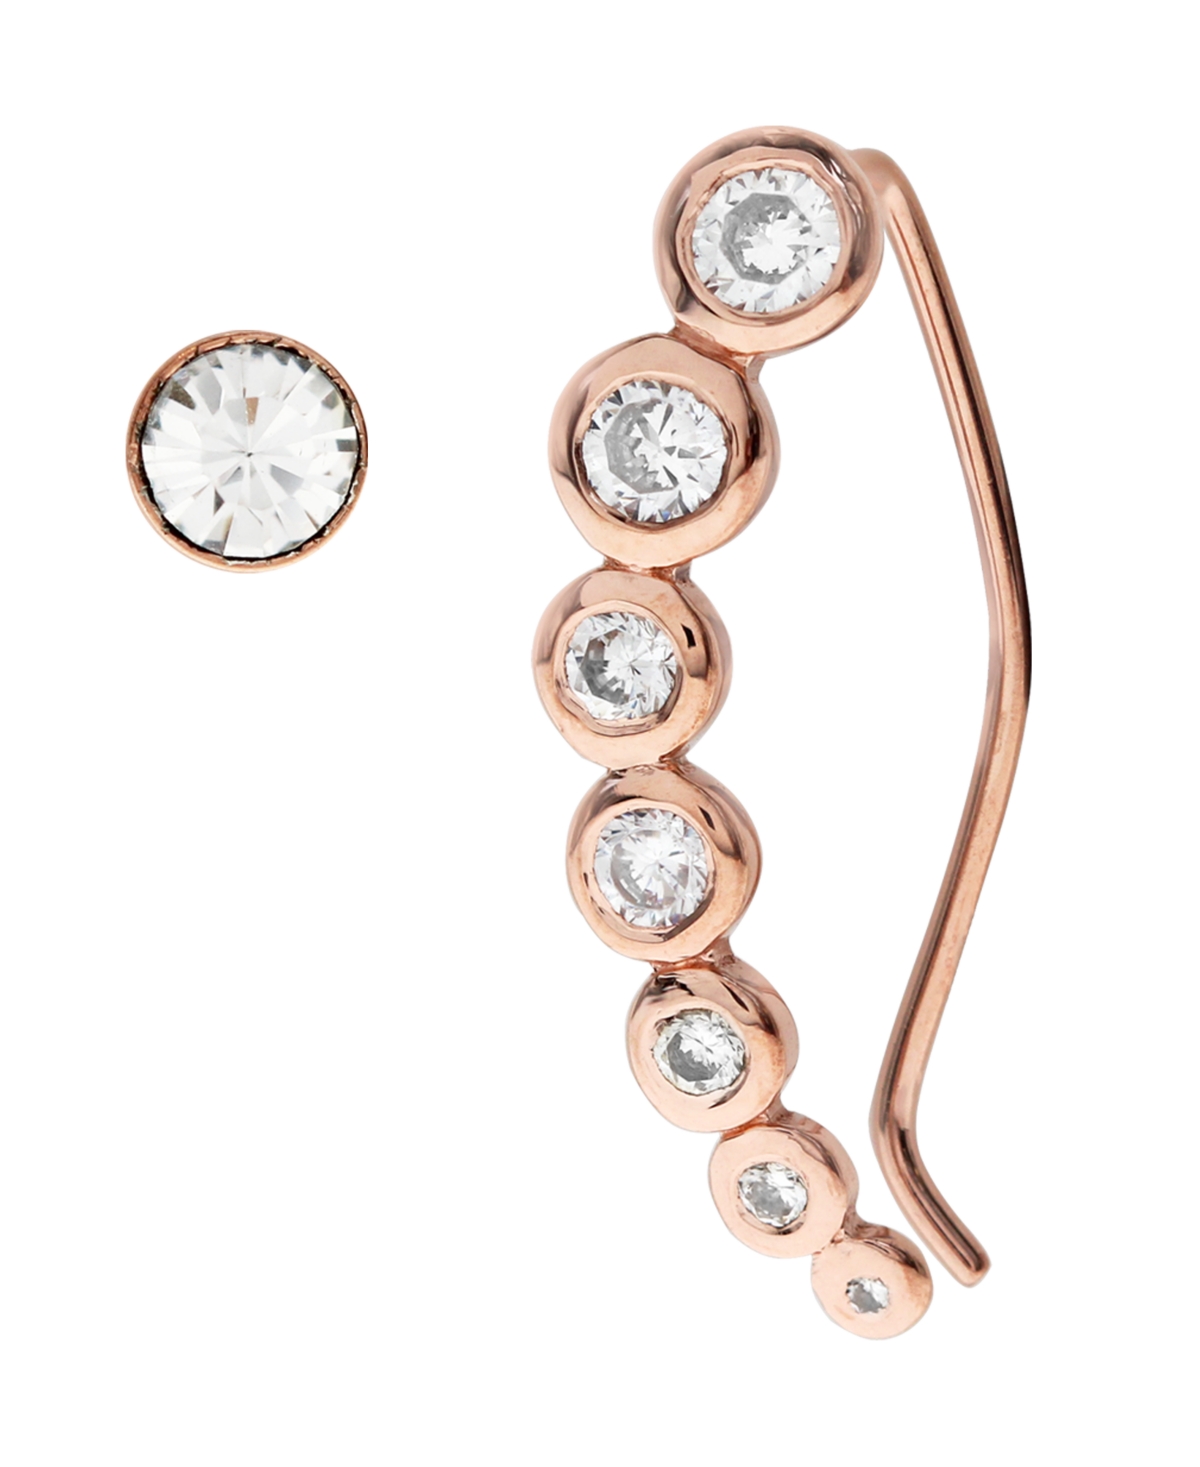 Bodifine Rose Gold Plated Sterling Silver Ear Climber and Stud Set - Rose Gold